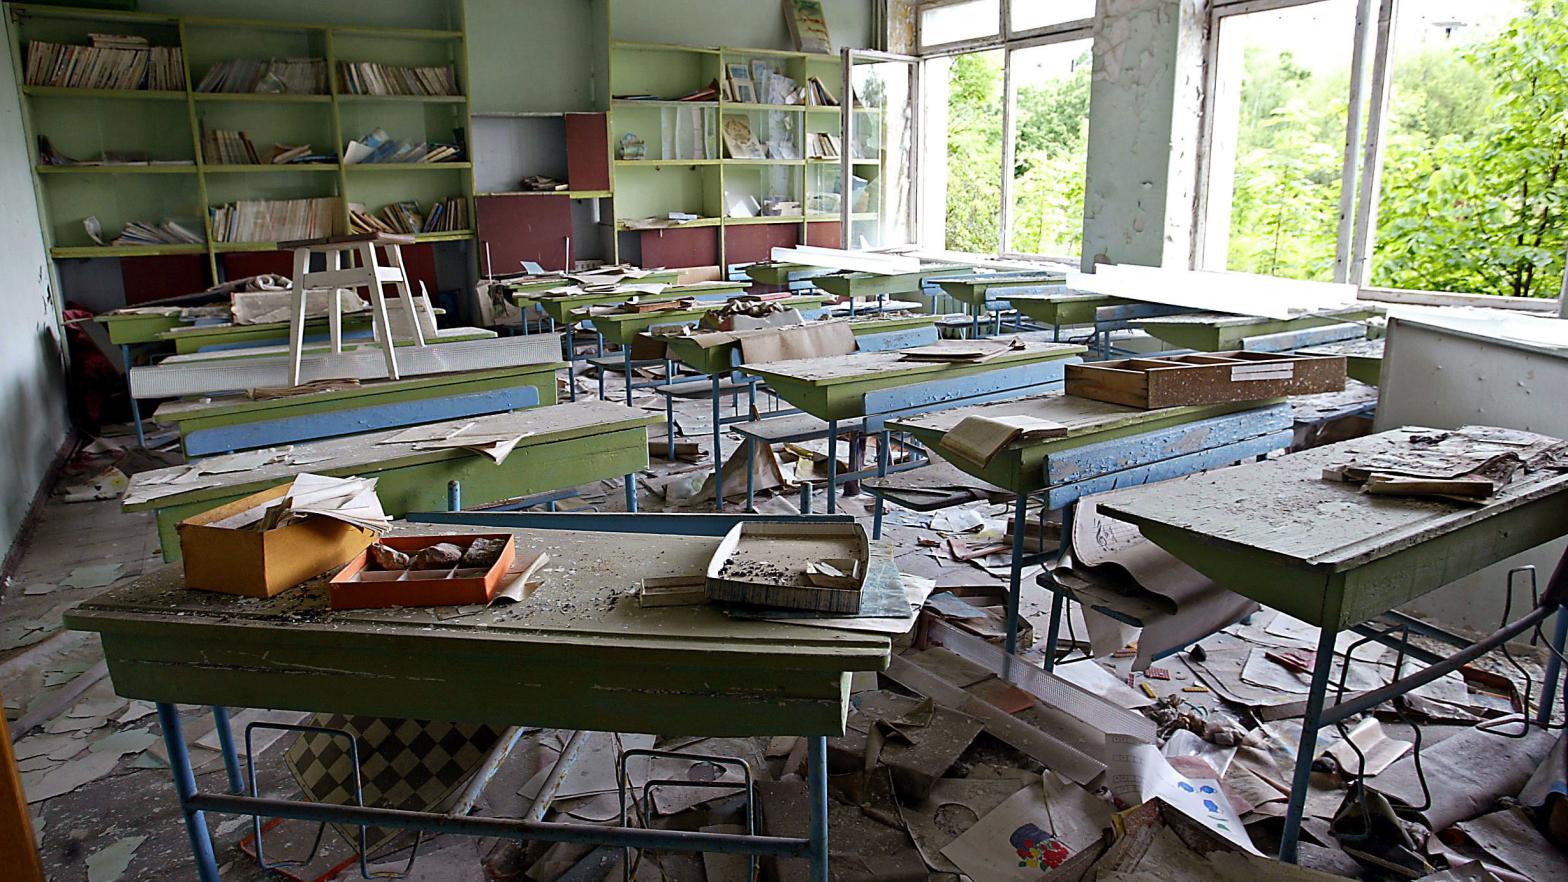 A view of an abandoned classroom on May, 26 2003, in the ghost town of Pripyat, adjacent to the Chernobyl nuclear site. (Photo: SERGEY SUPINSKI/AFP, Getty Images)